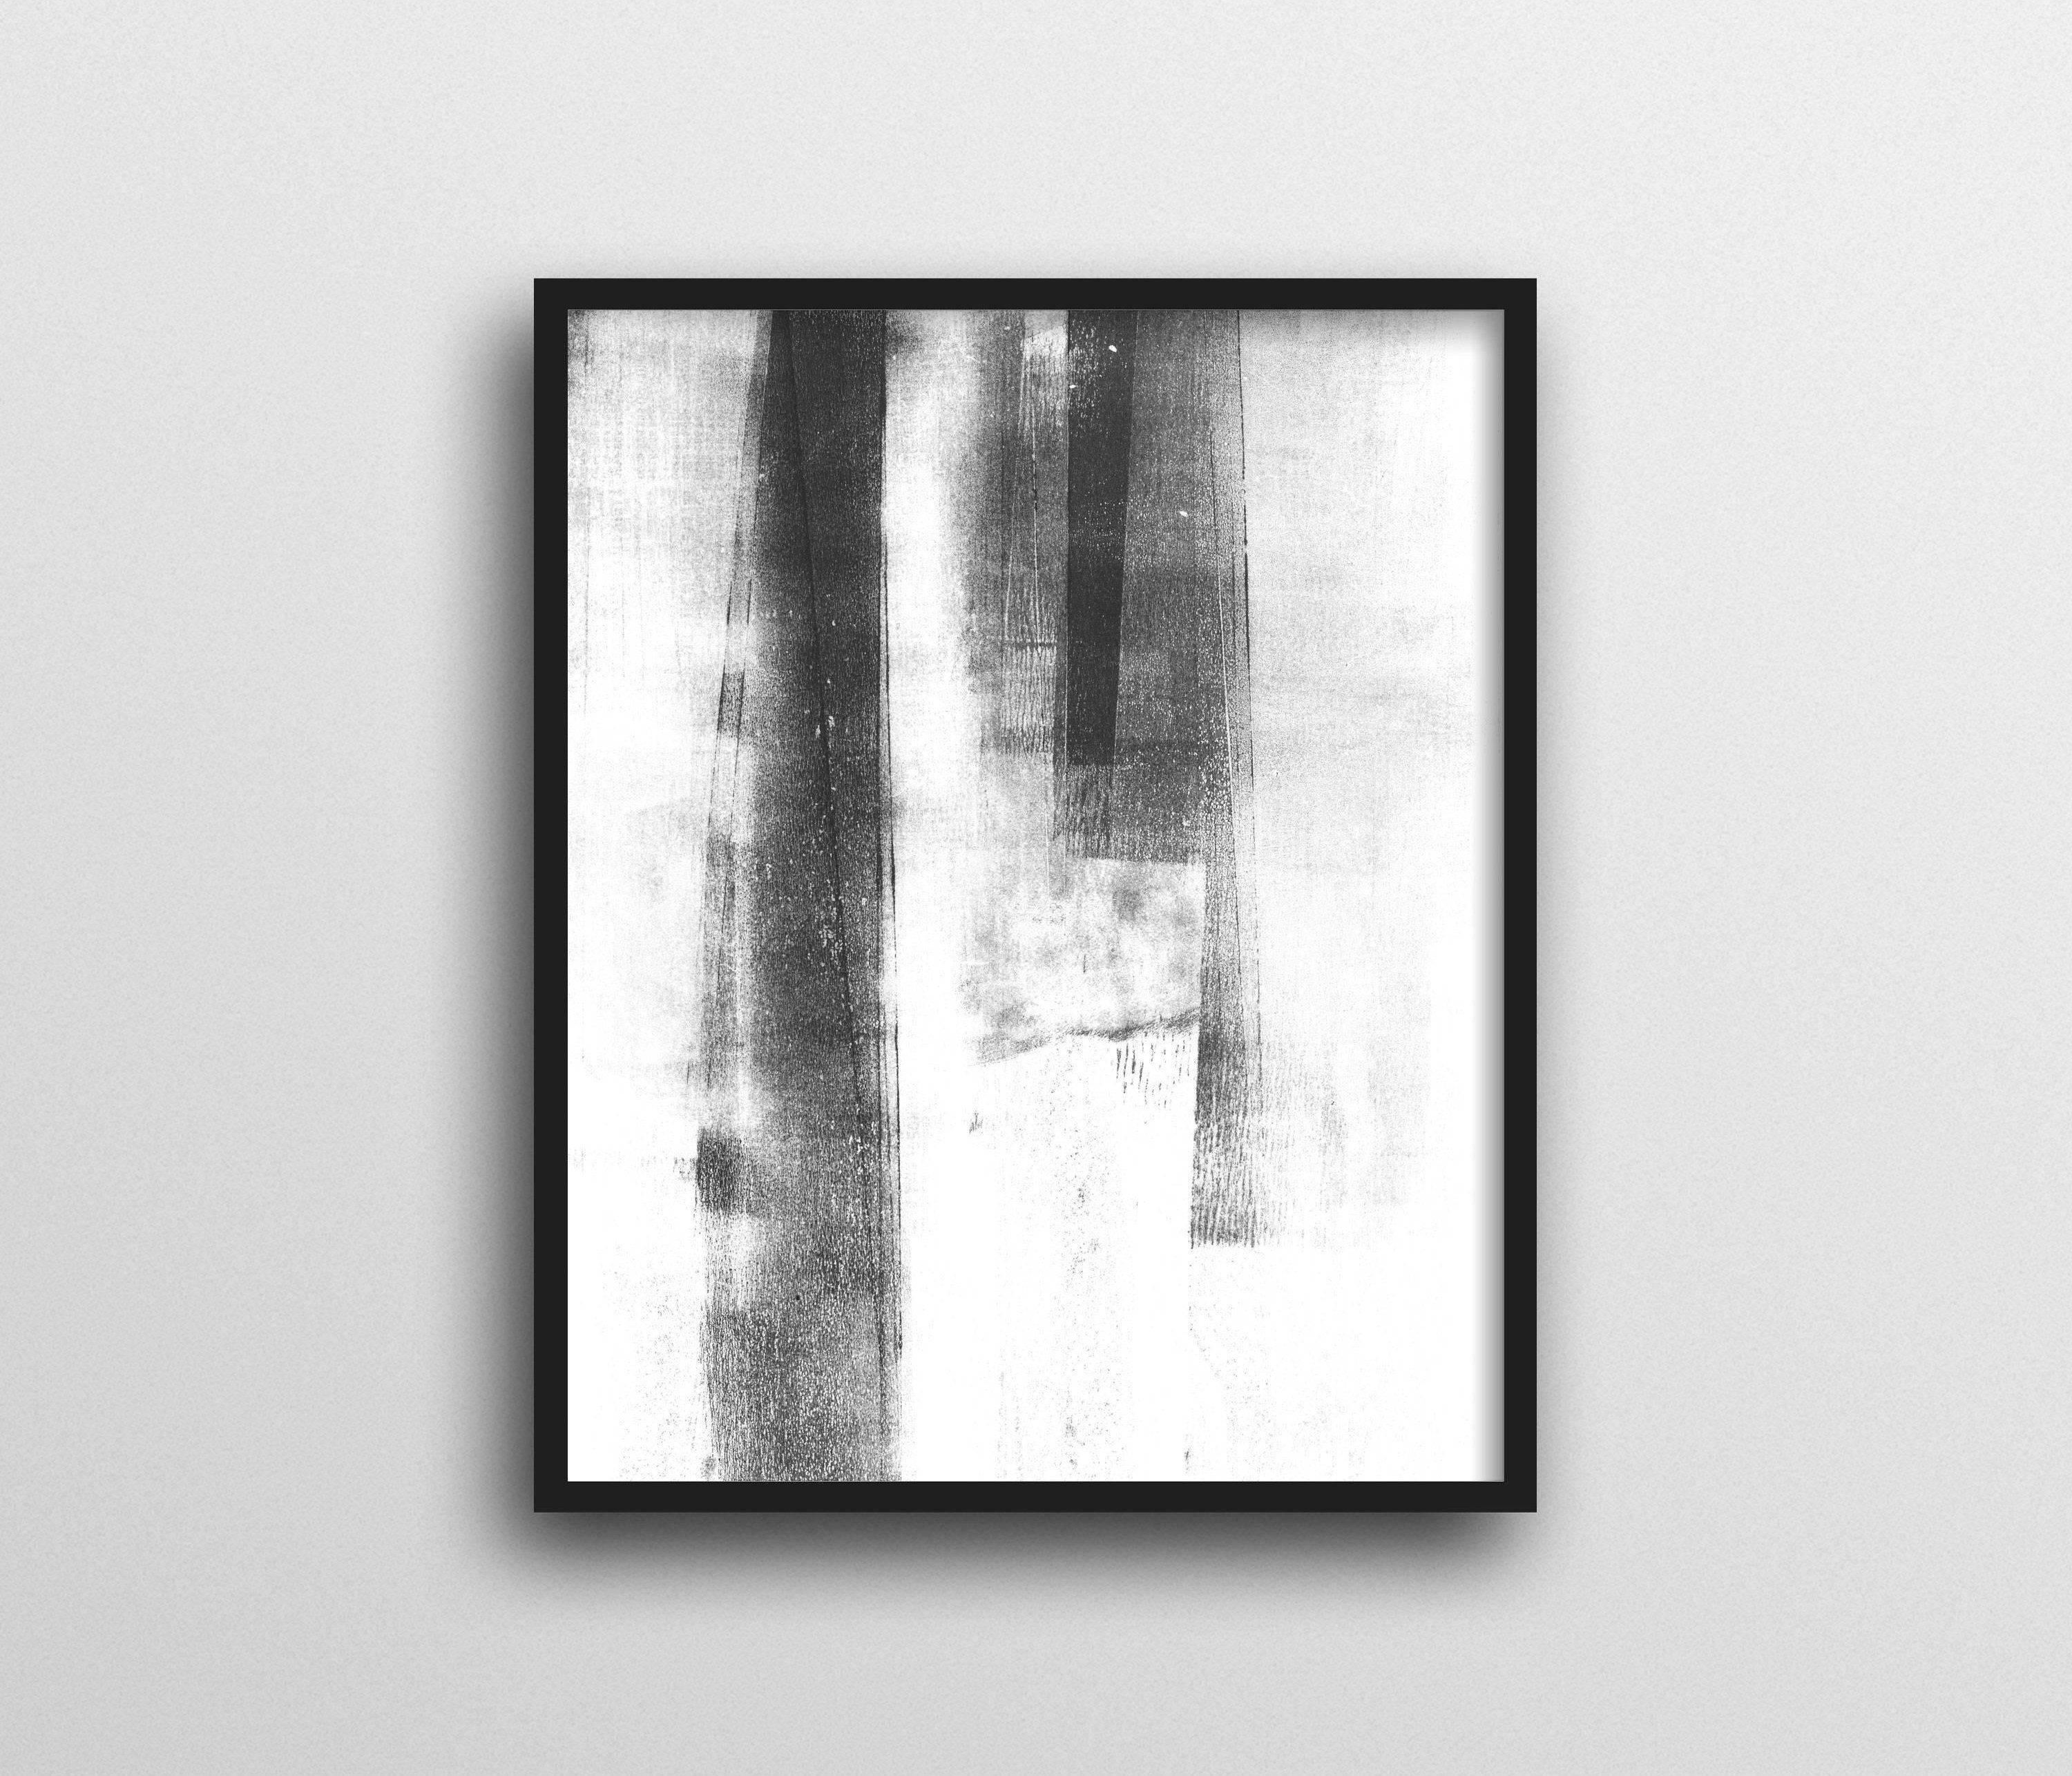 Most Popular Abstract Art, Minimalist Art, Black & White Wall Art, Scandinavian Throughout Black And White Abstract Wall Art (View 4 of 15)